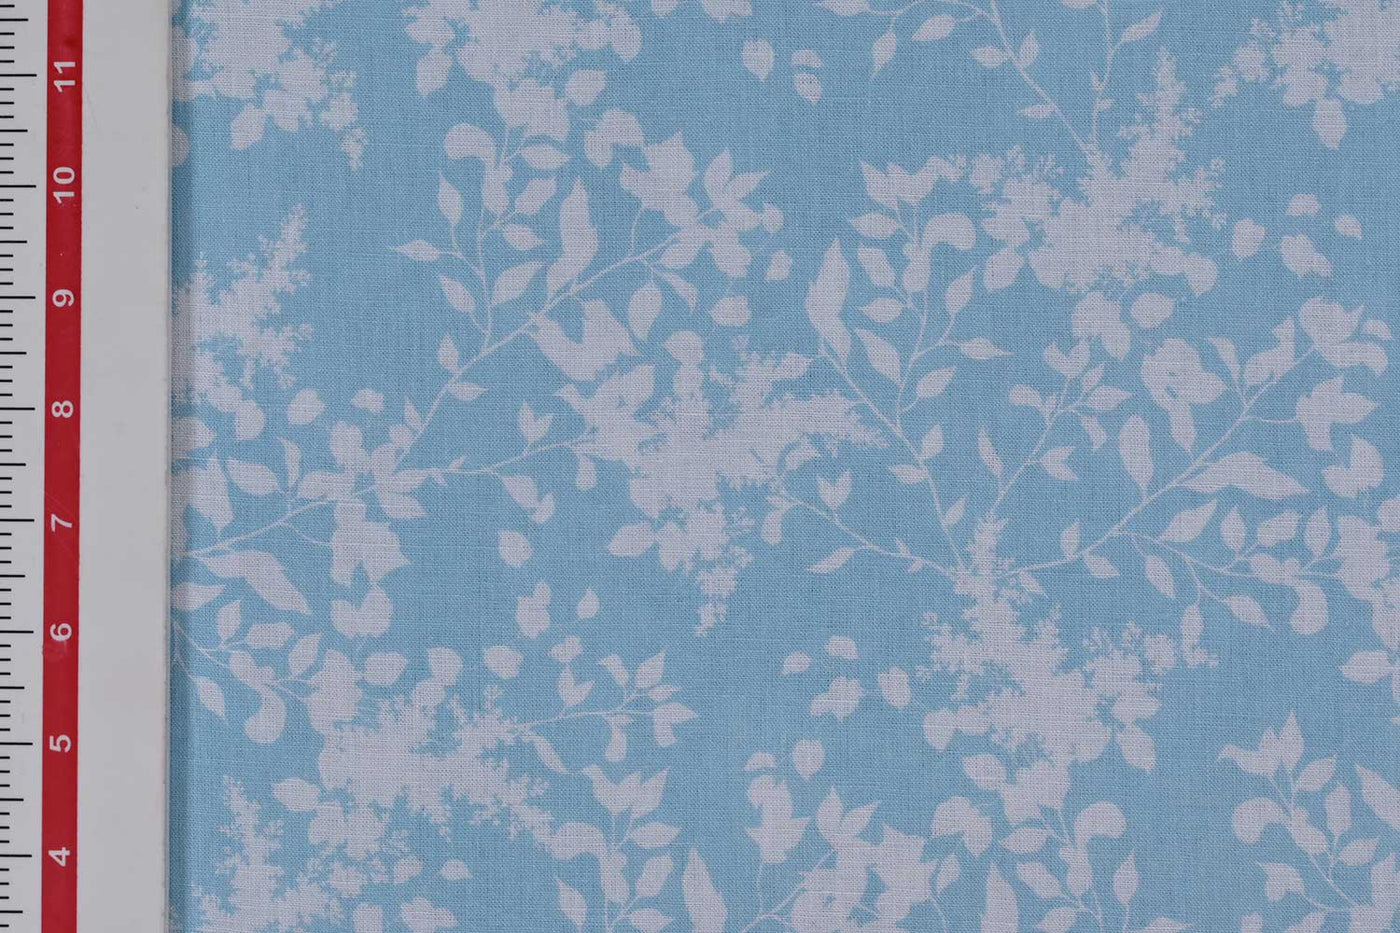 Light Blue & White Floral Printed Linen Fabric